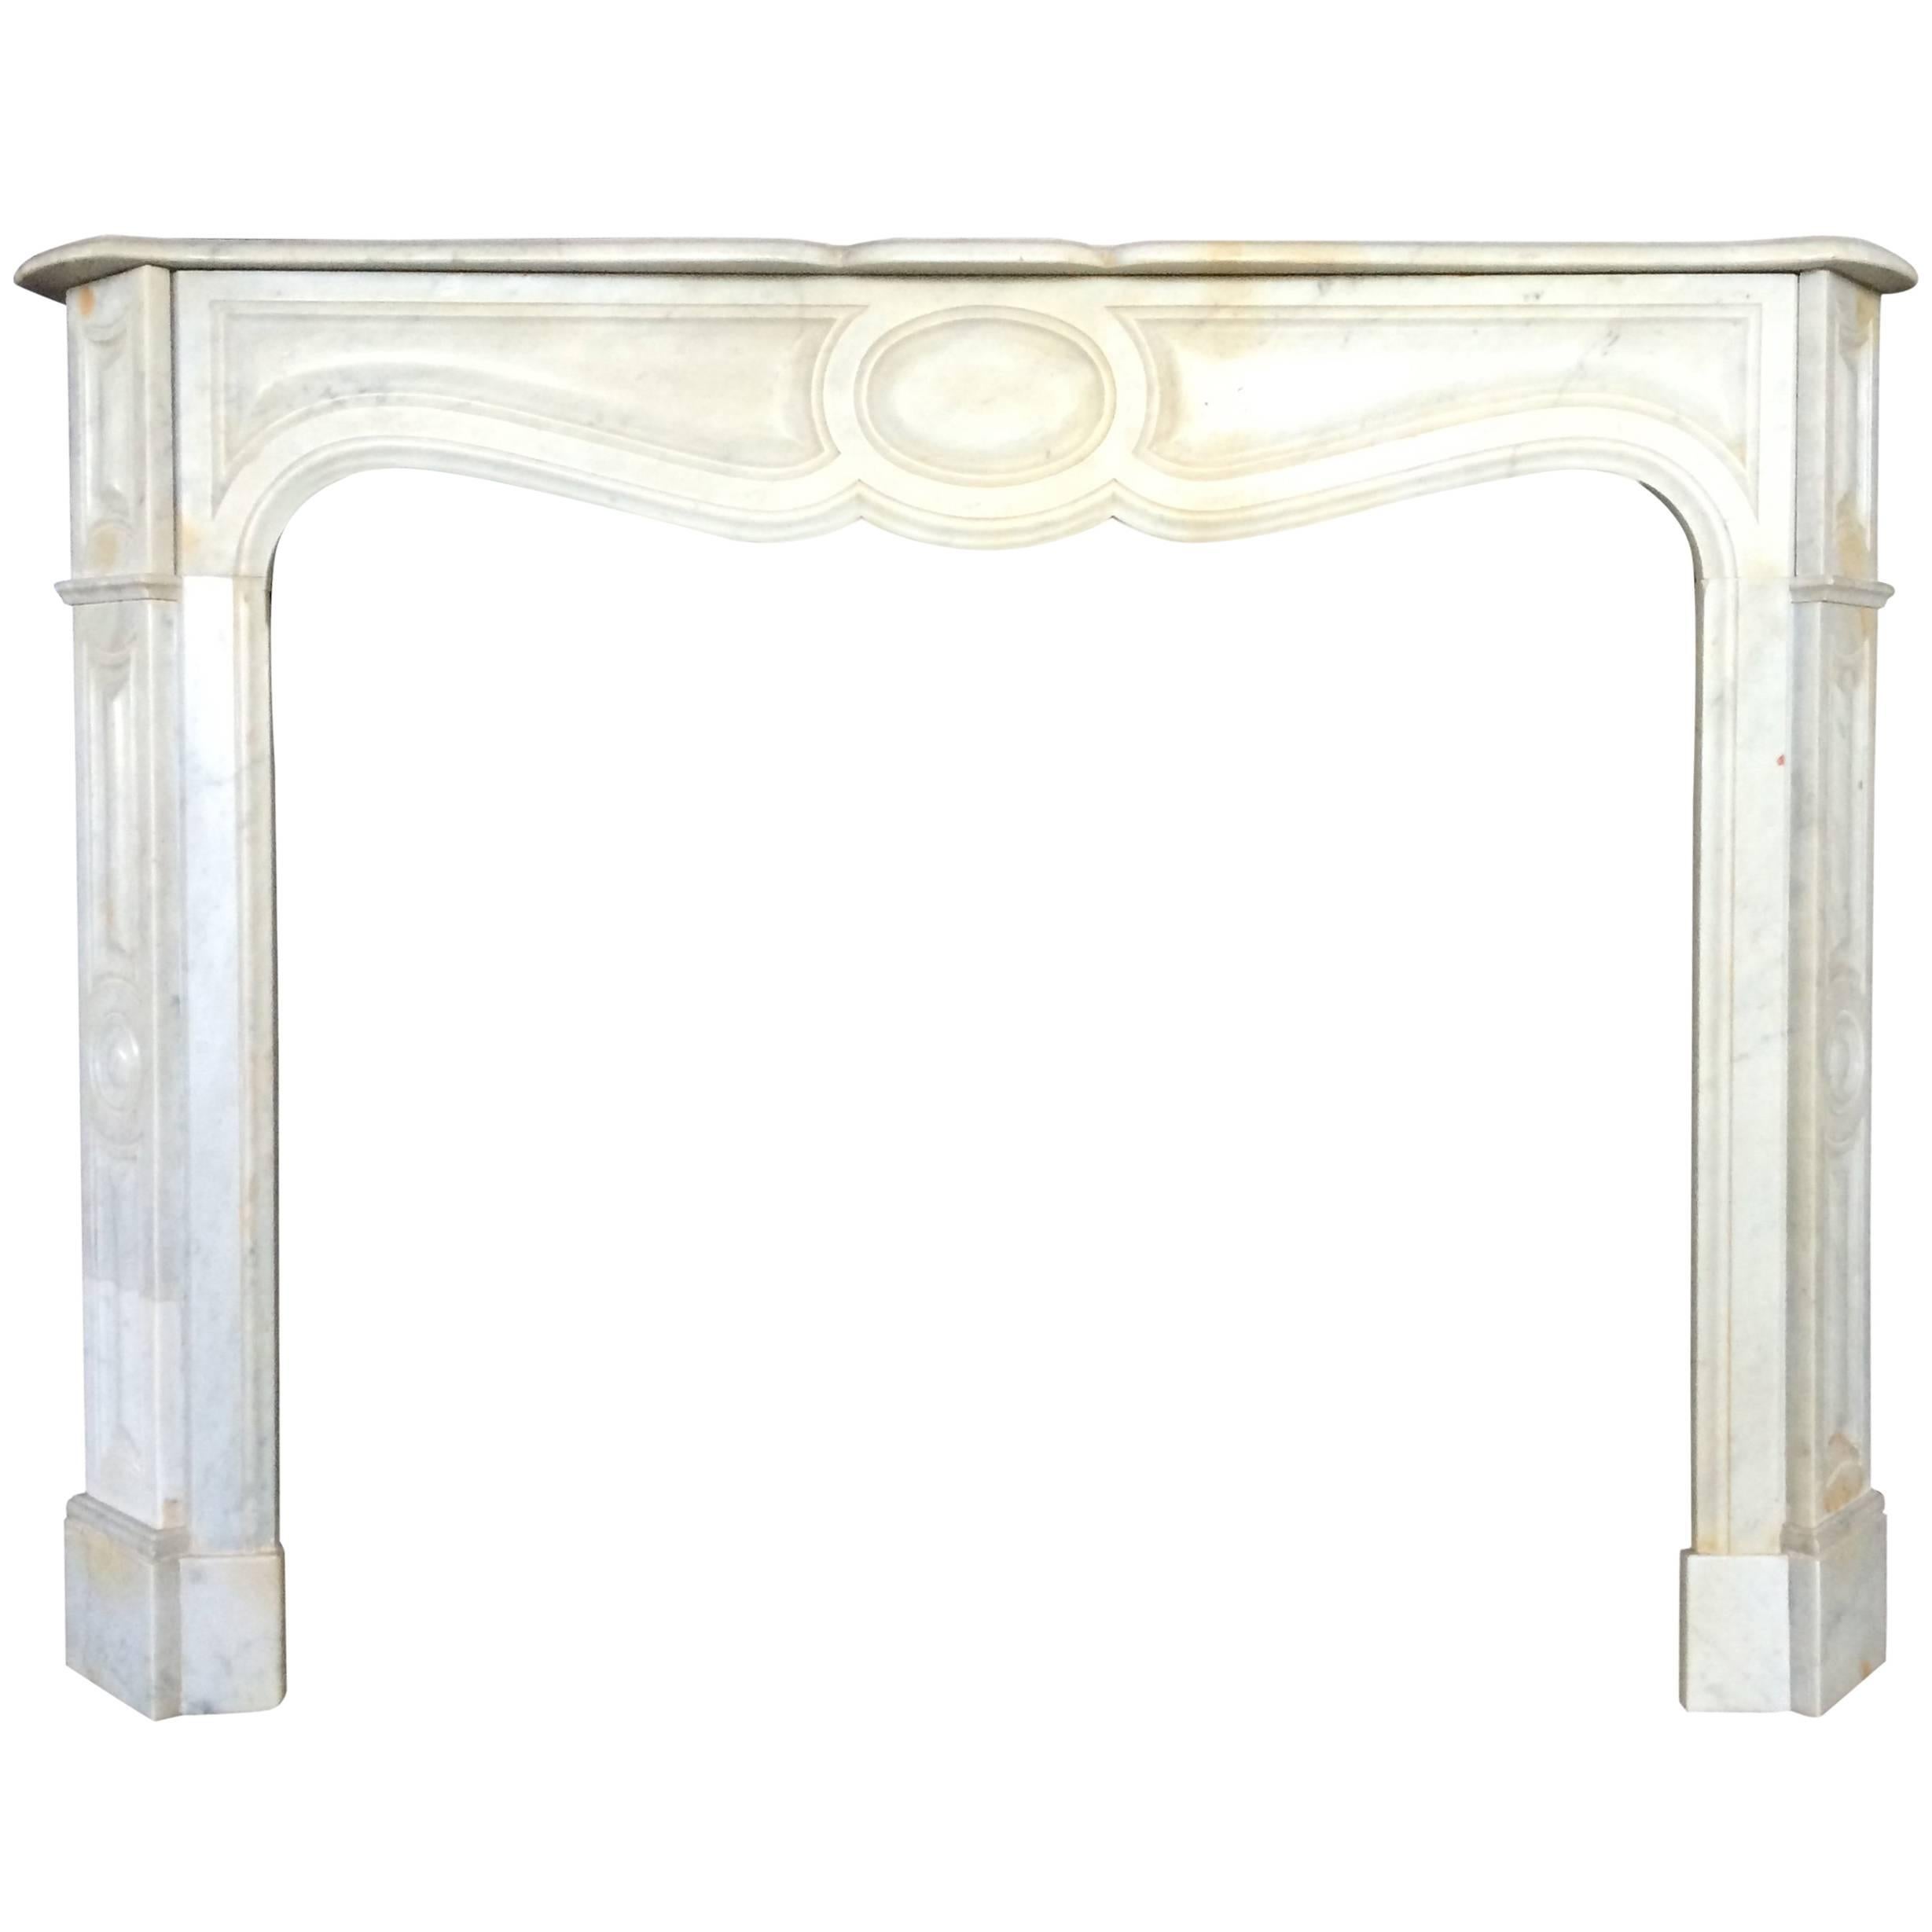 French Antique White Marble Fireplace Louis XV Style 19th Century, Paris, France For Sale